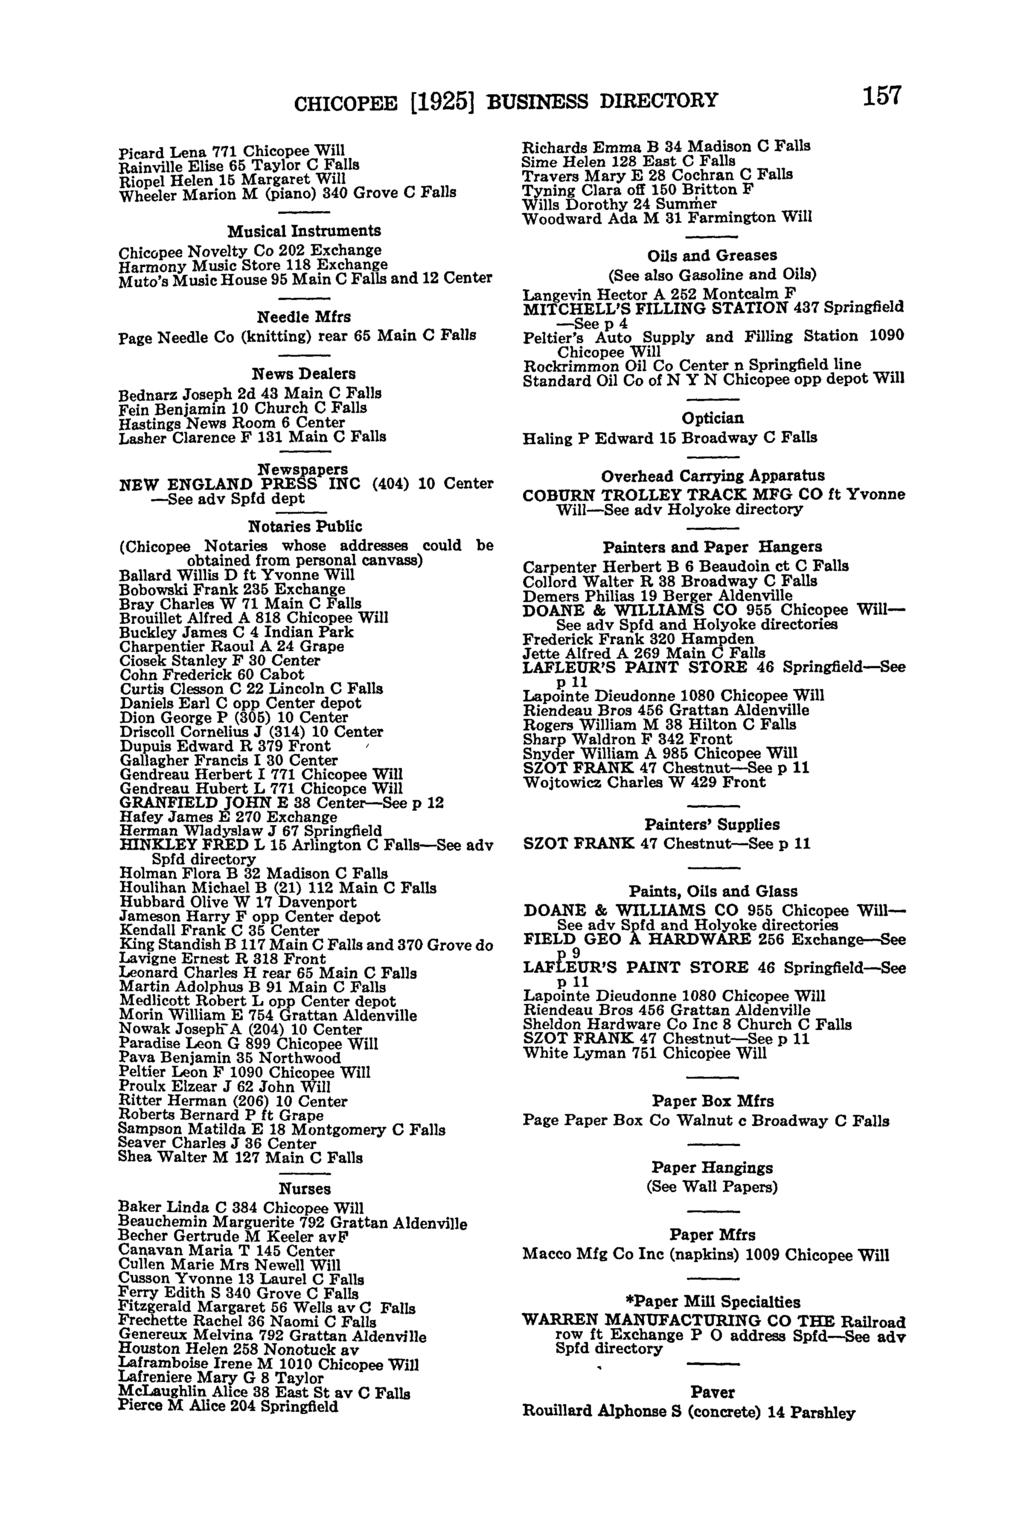 CHICOPEE [1925] BUSINESS DIRECTORY 157 Picard Lena 771 Chicopee Rainville Elise 65 Taylor Riopel Helen 15 Margaret Wheeler Marion M (piano) 340 Grove Musical Instruments Chicopee Novelty Co 202